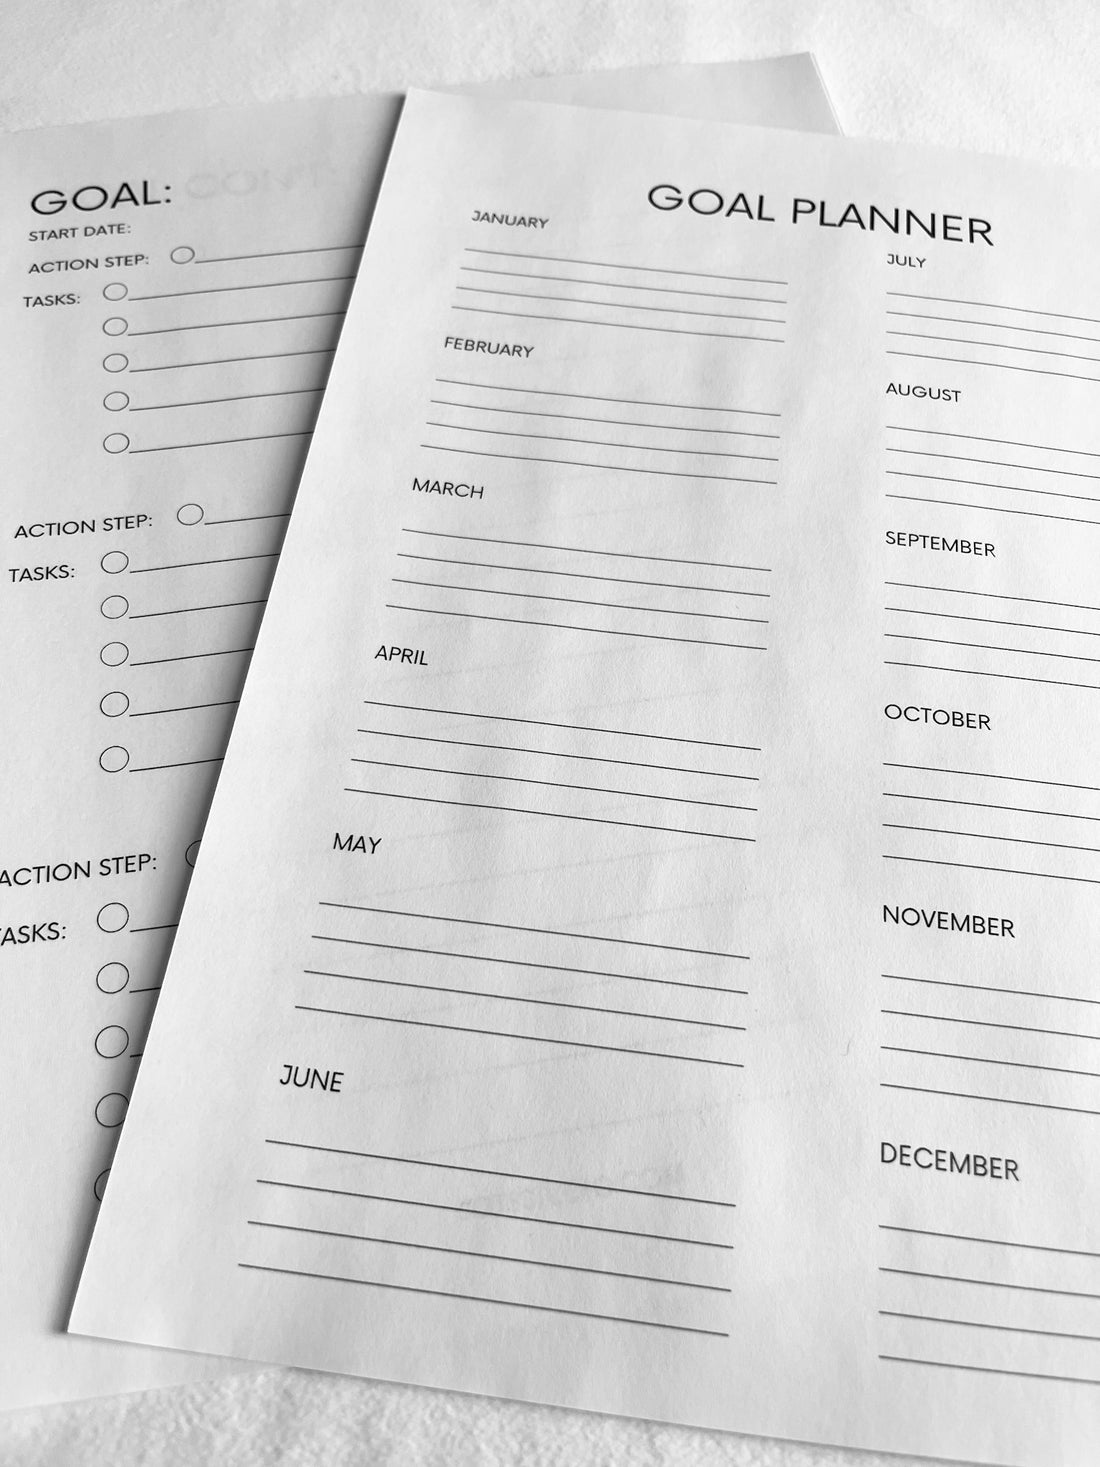 Goal Planner to help prep for a project or class